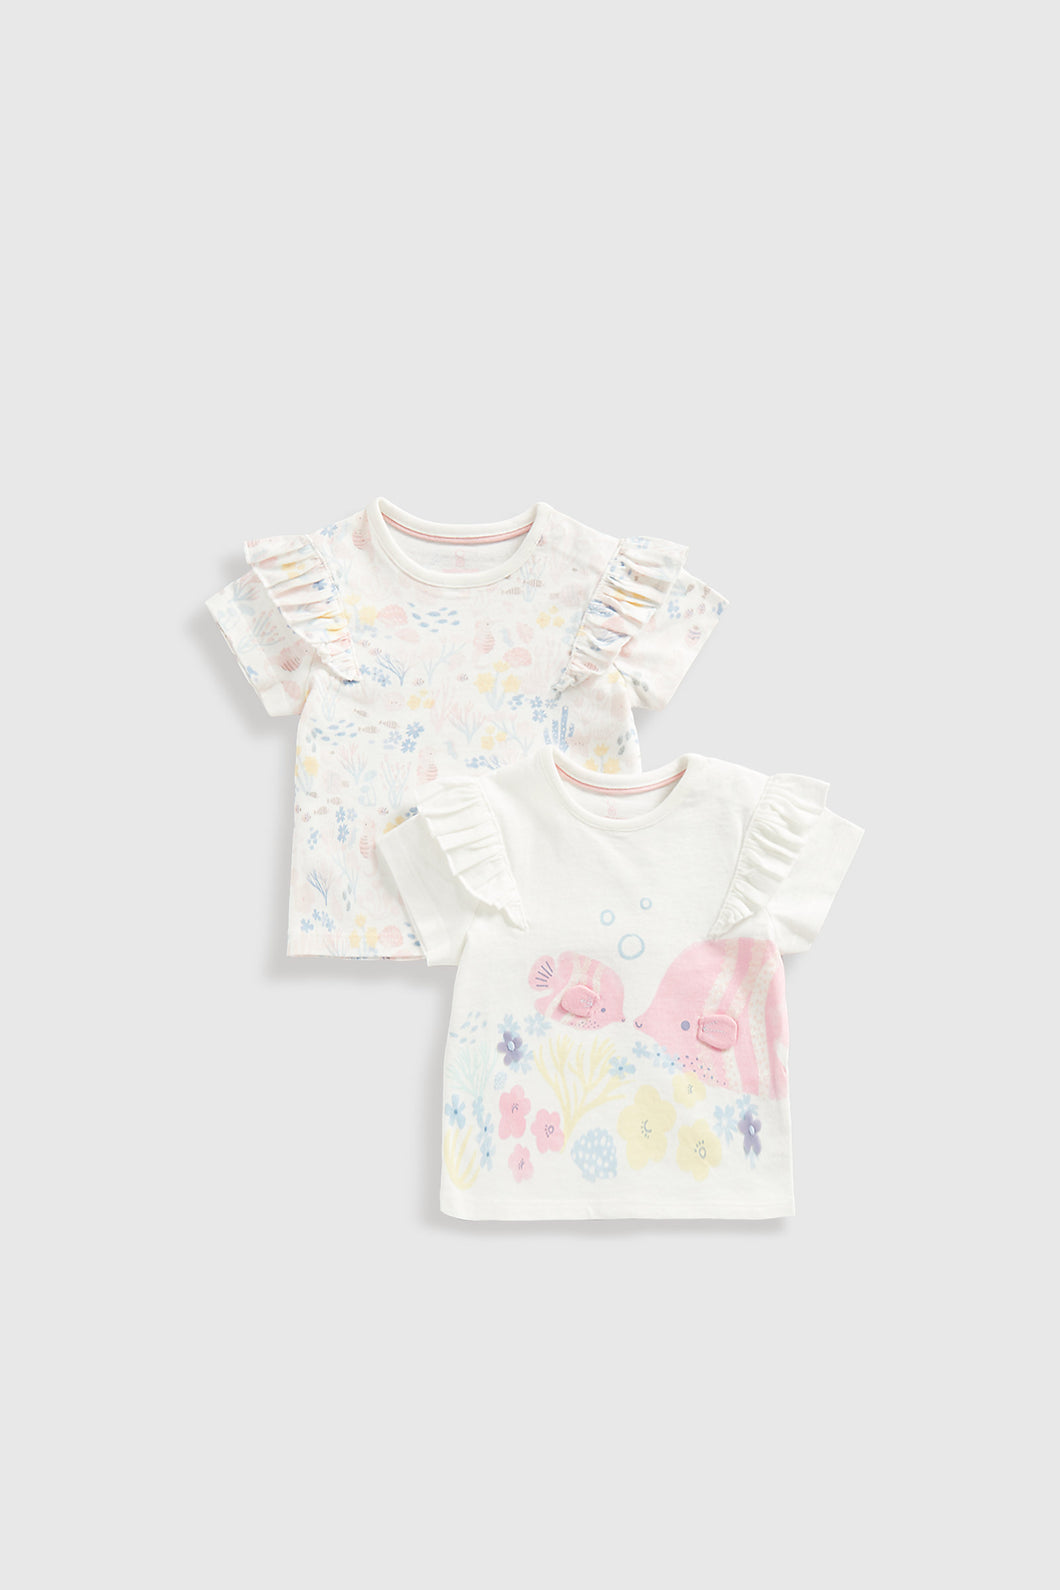 Mothercare Sea-Life T-Shirts - 2 Pack